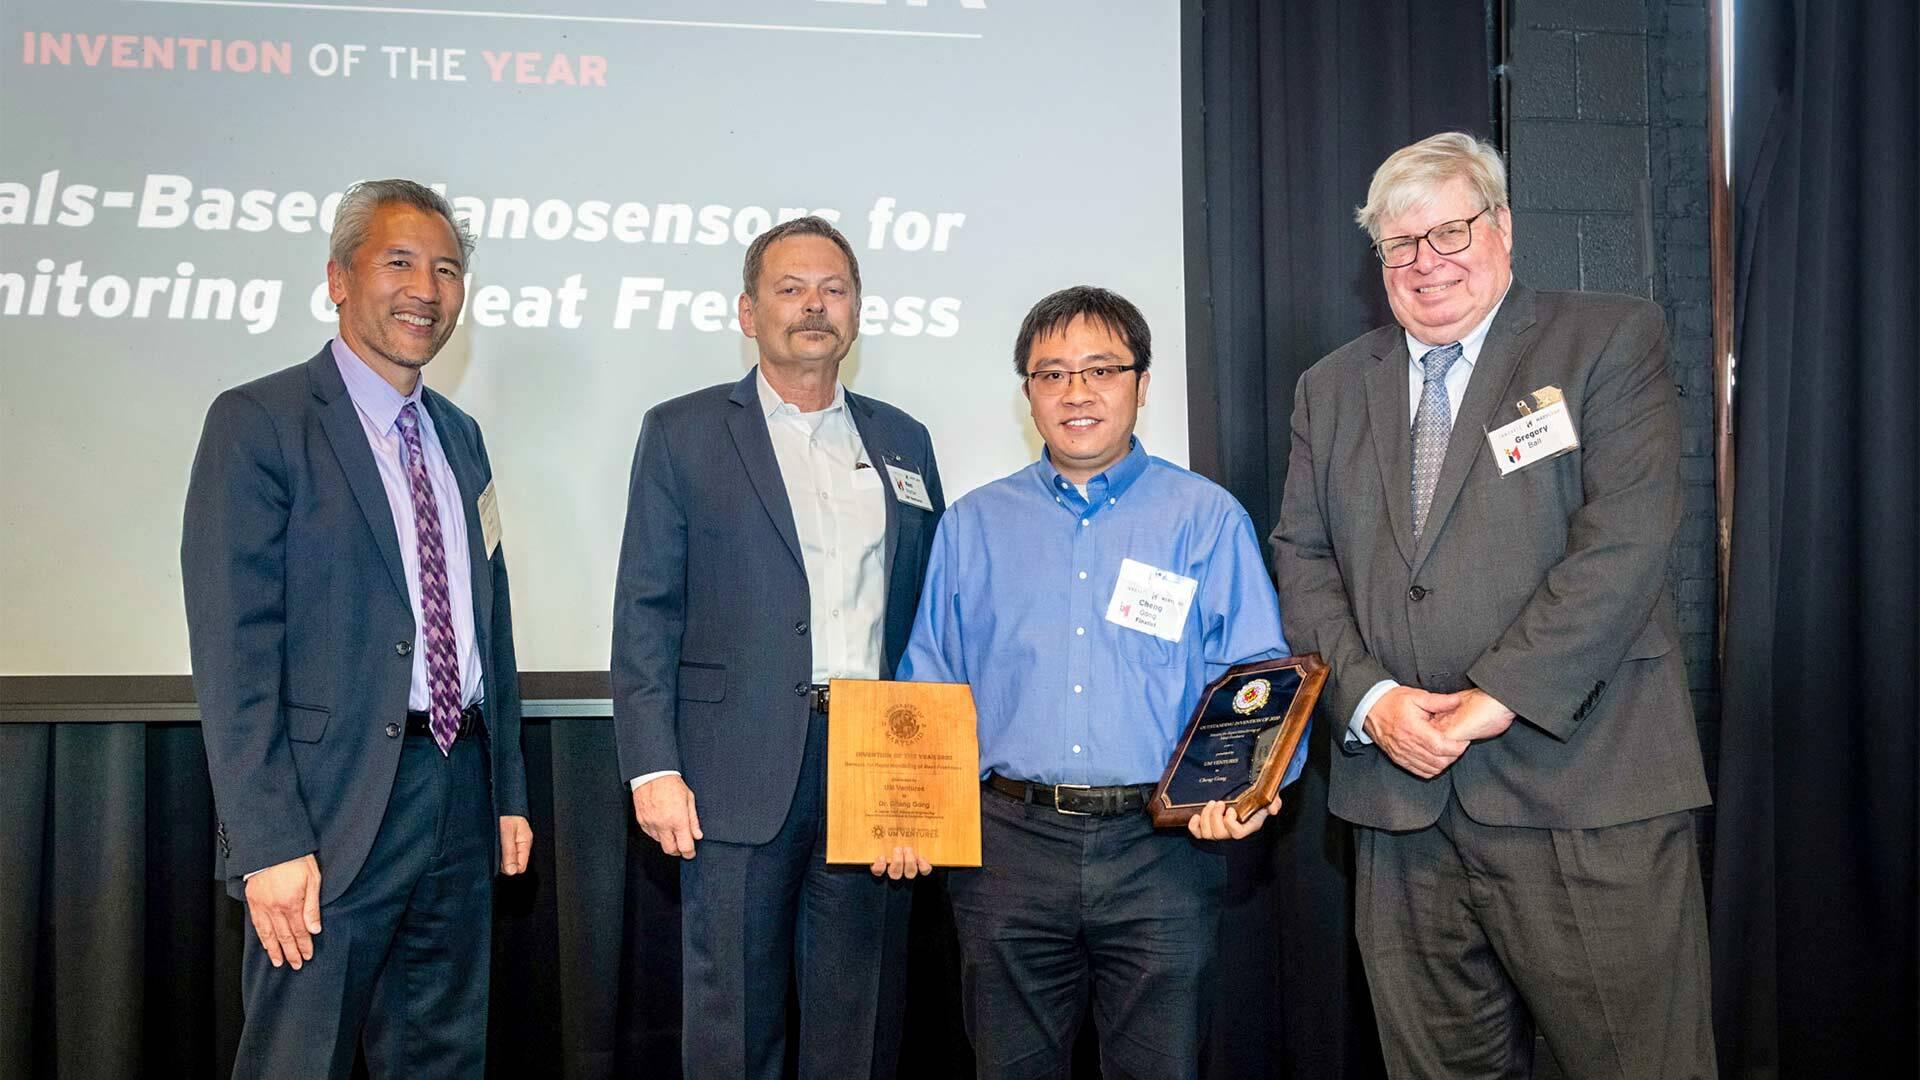 Cheng Gong wins Overall Invention of the Year at Innovate Maryland, alongside Dean Chang, Ken Porter, and Gregory Ball